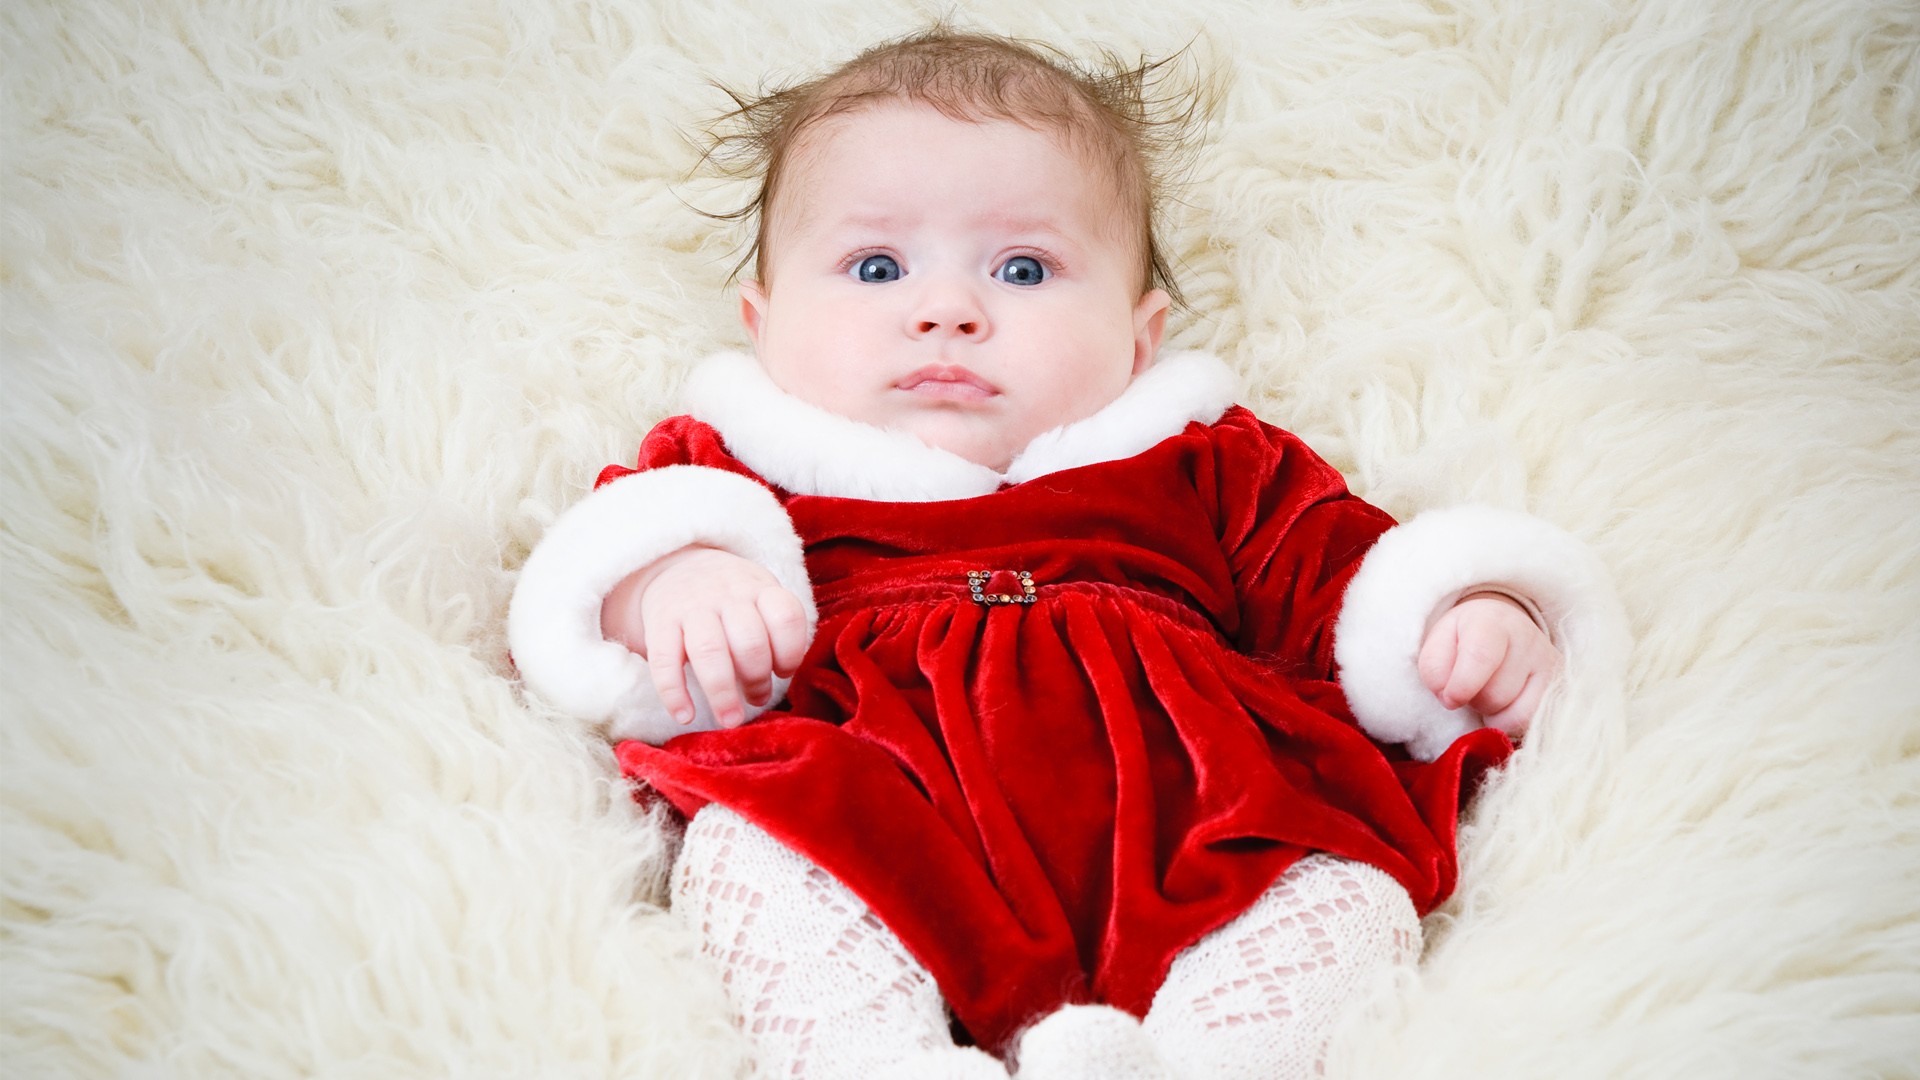 20 Cute Baby Girl Pictures - Baby - MomCanvas